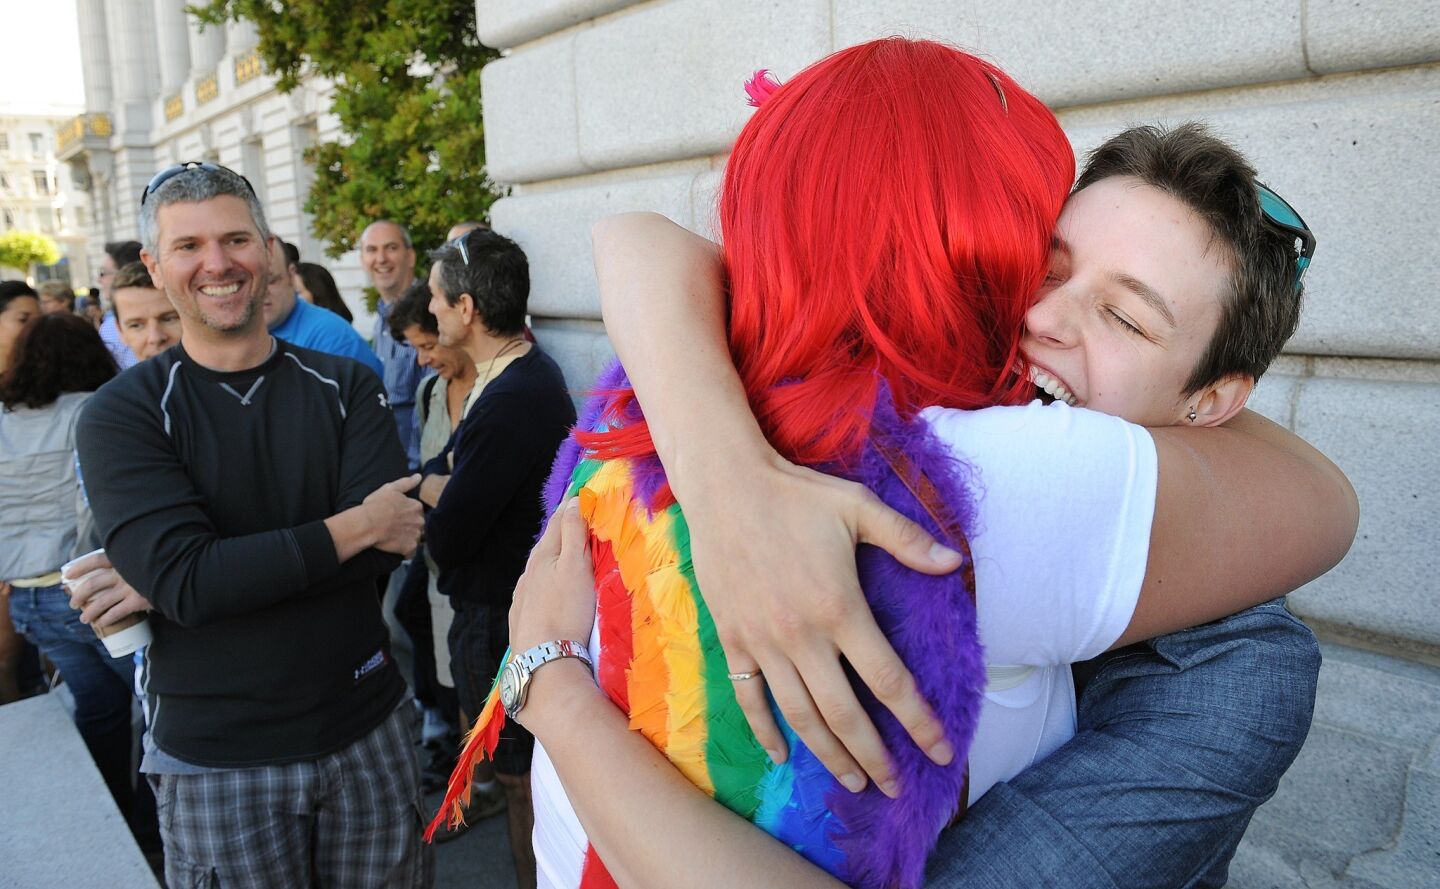 Brandie Yelland, left, hugs friend Erika Lewis in support of her marriage outside City Hall in San Francisco Saturday.